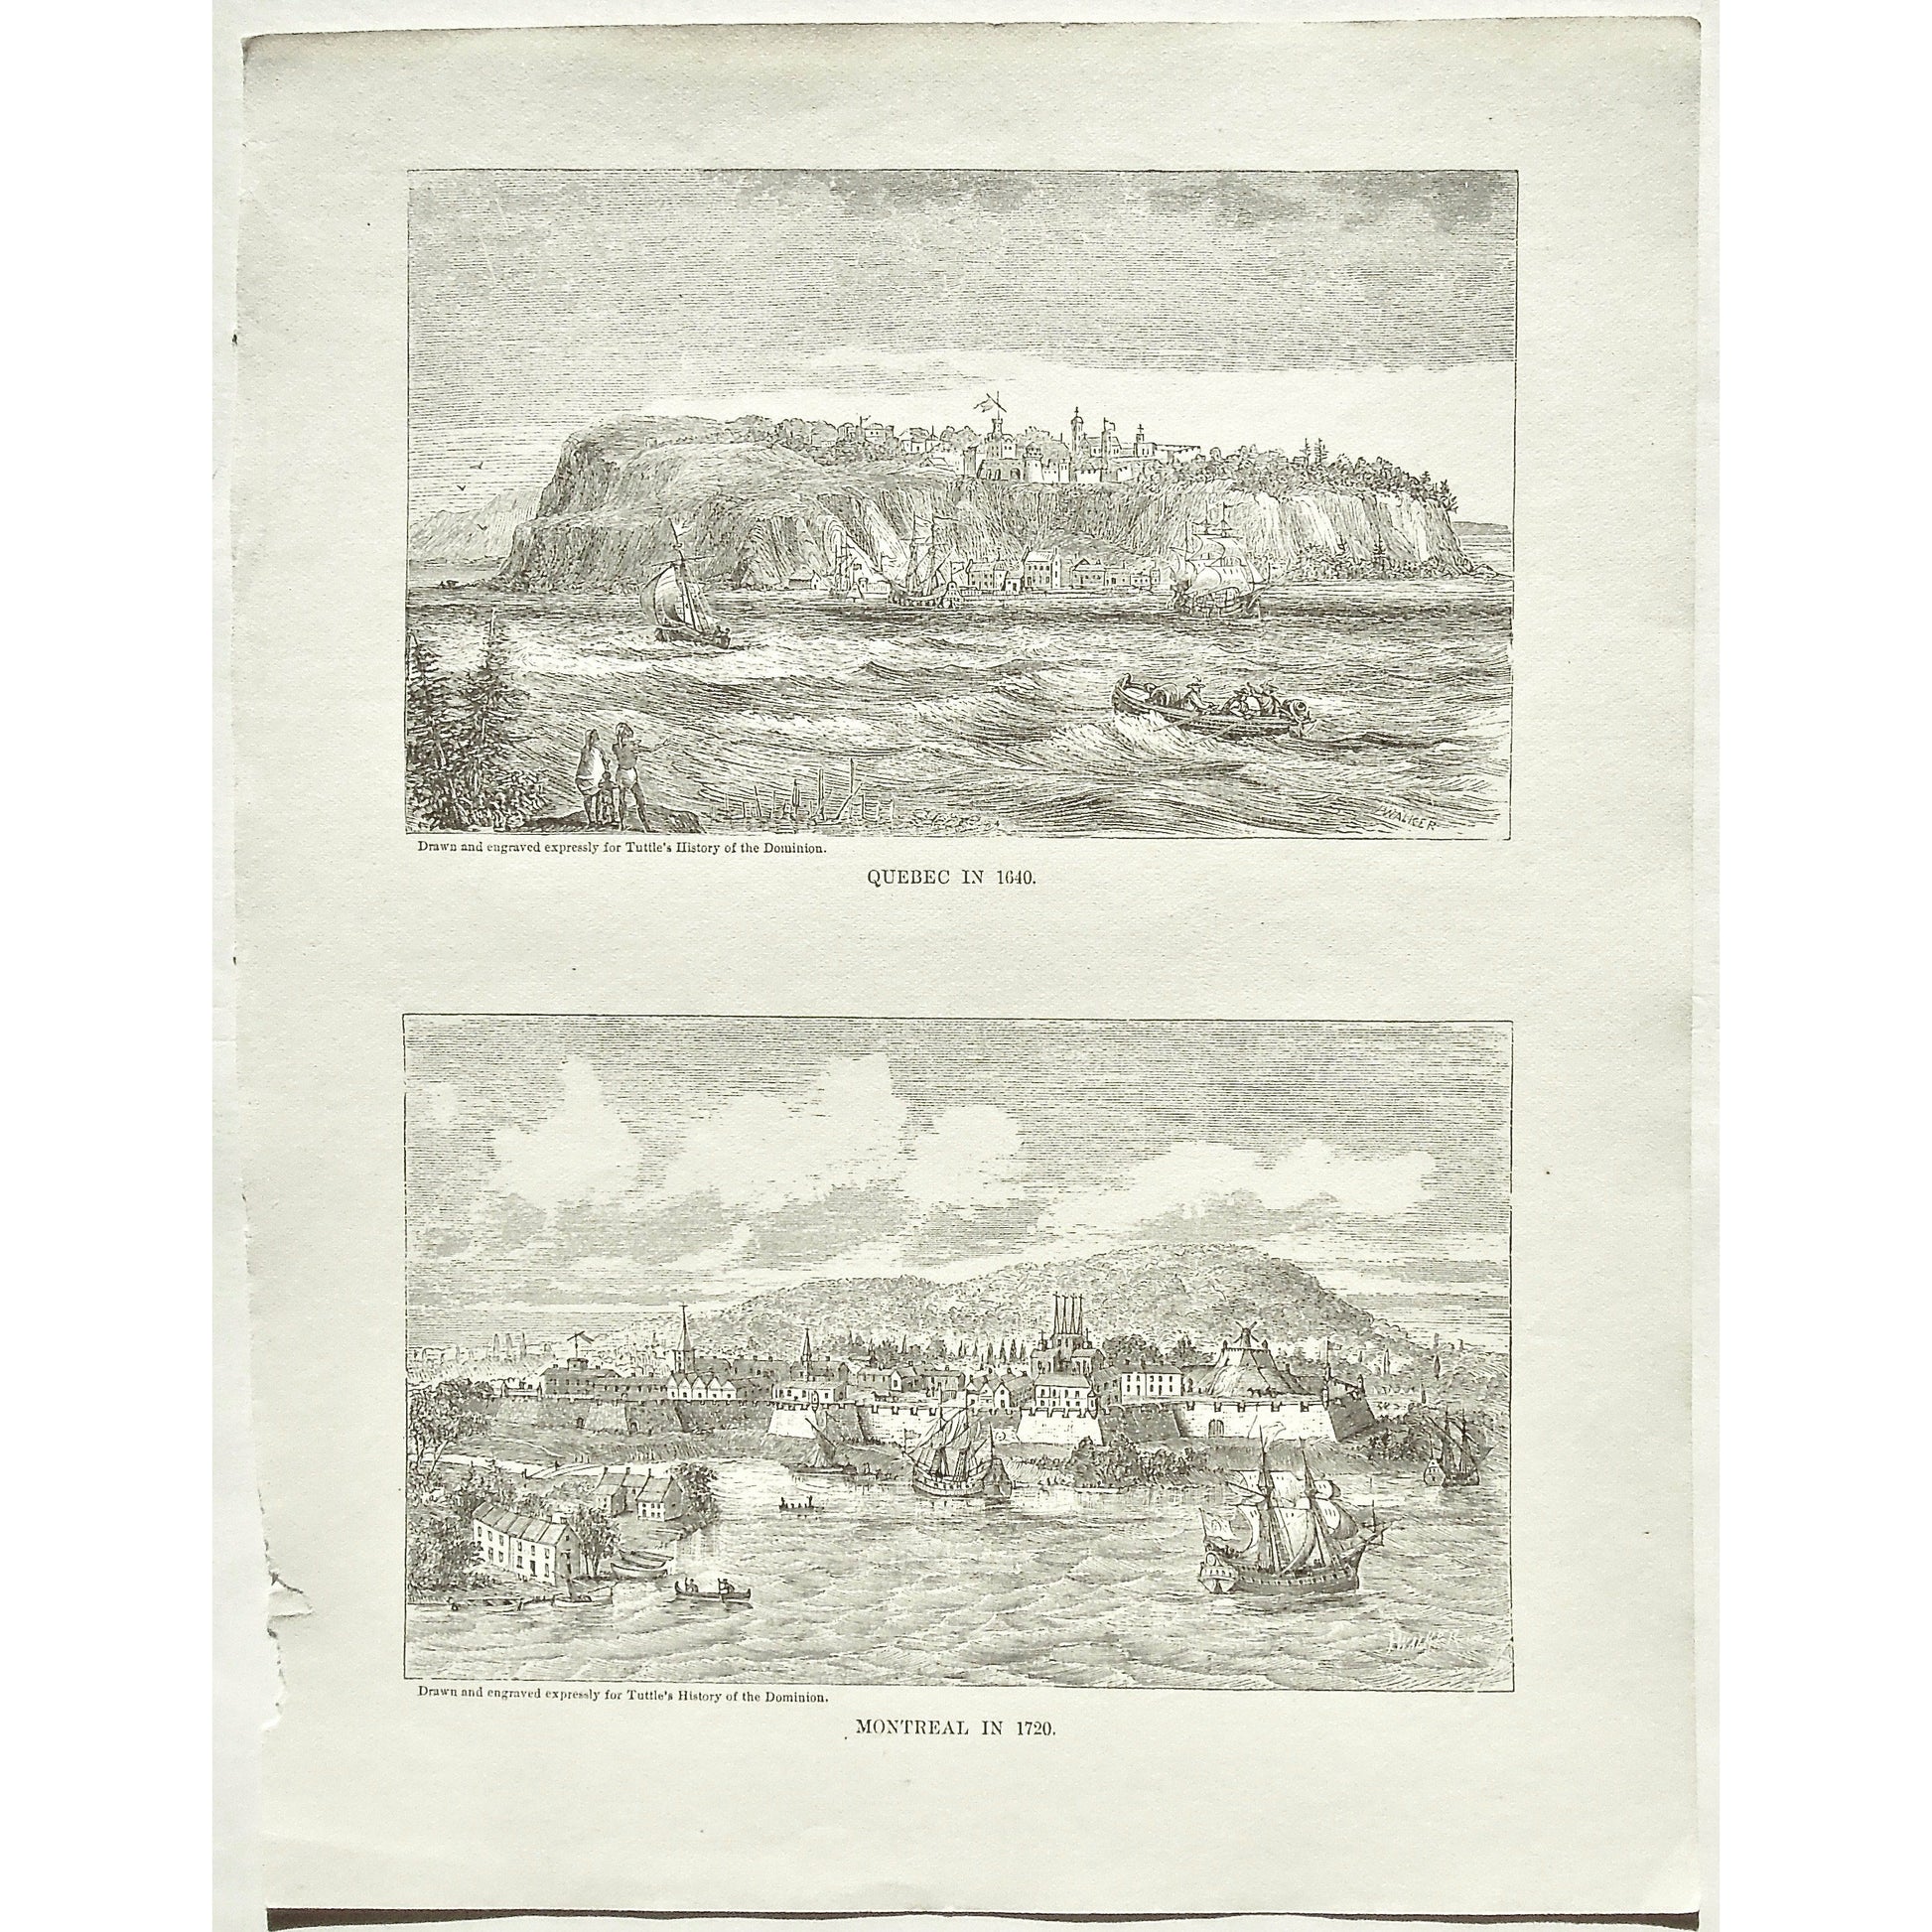 Quebec, 1640, Montreal, 1720, Ships, Boats, Sailing, Rowing, Canoes, Buildings, from the water, Town, Tuttle, Charles Tuttle, History of the Dominion, Popular History of the Dominion, Downie, Bigney, History, Dominion, Canada, Canadian History, Antique, Antique Print, Steel Engraving, Engraving, Prints, Printmaking, Original, Rare prints, rare books, Wall decor, Home decor, office art, Unique, 1877, Old prints, historical prints, Canadian prints, Art History, History of Art, City View, Shipping, Interiors,